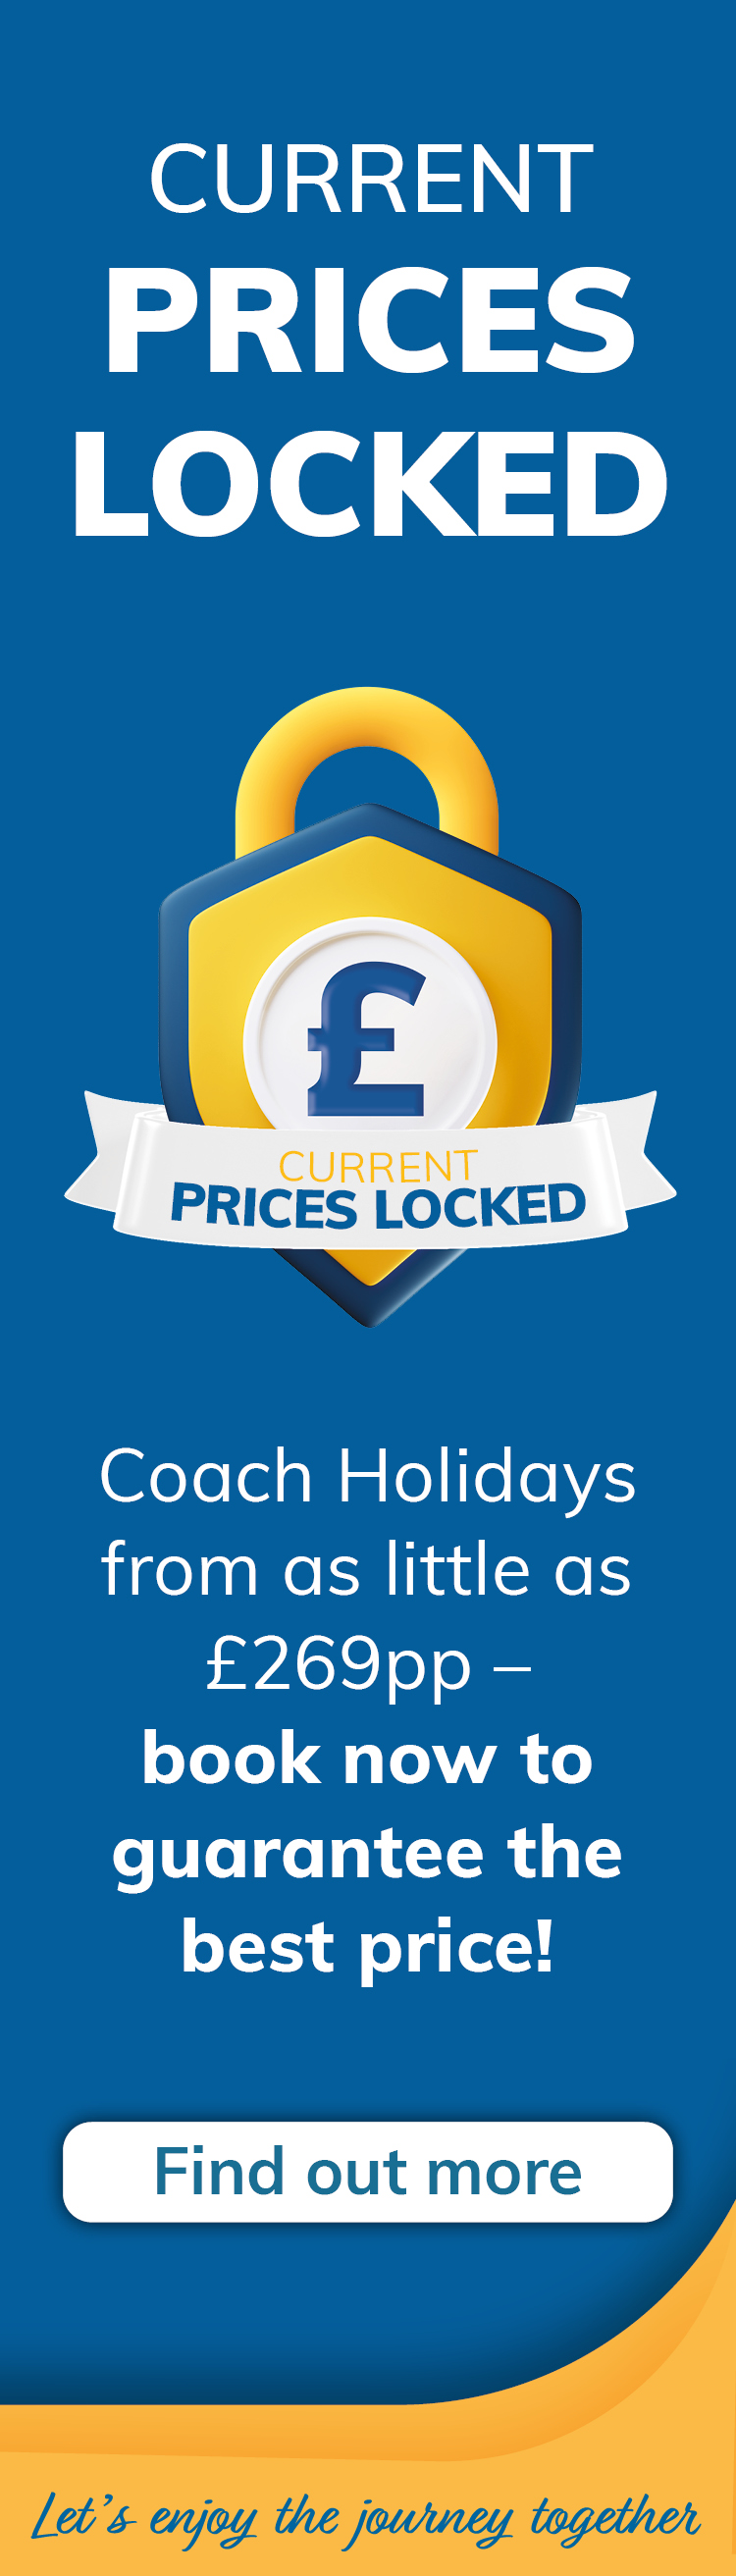 Current Prices Locked. Coach Holidays from as little as £269pp - book now to guarantee the best price. Find out more. Let's enjoy the journey together.